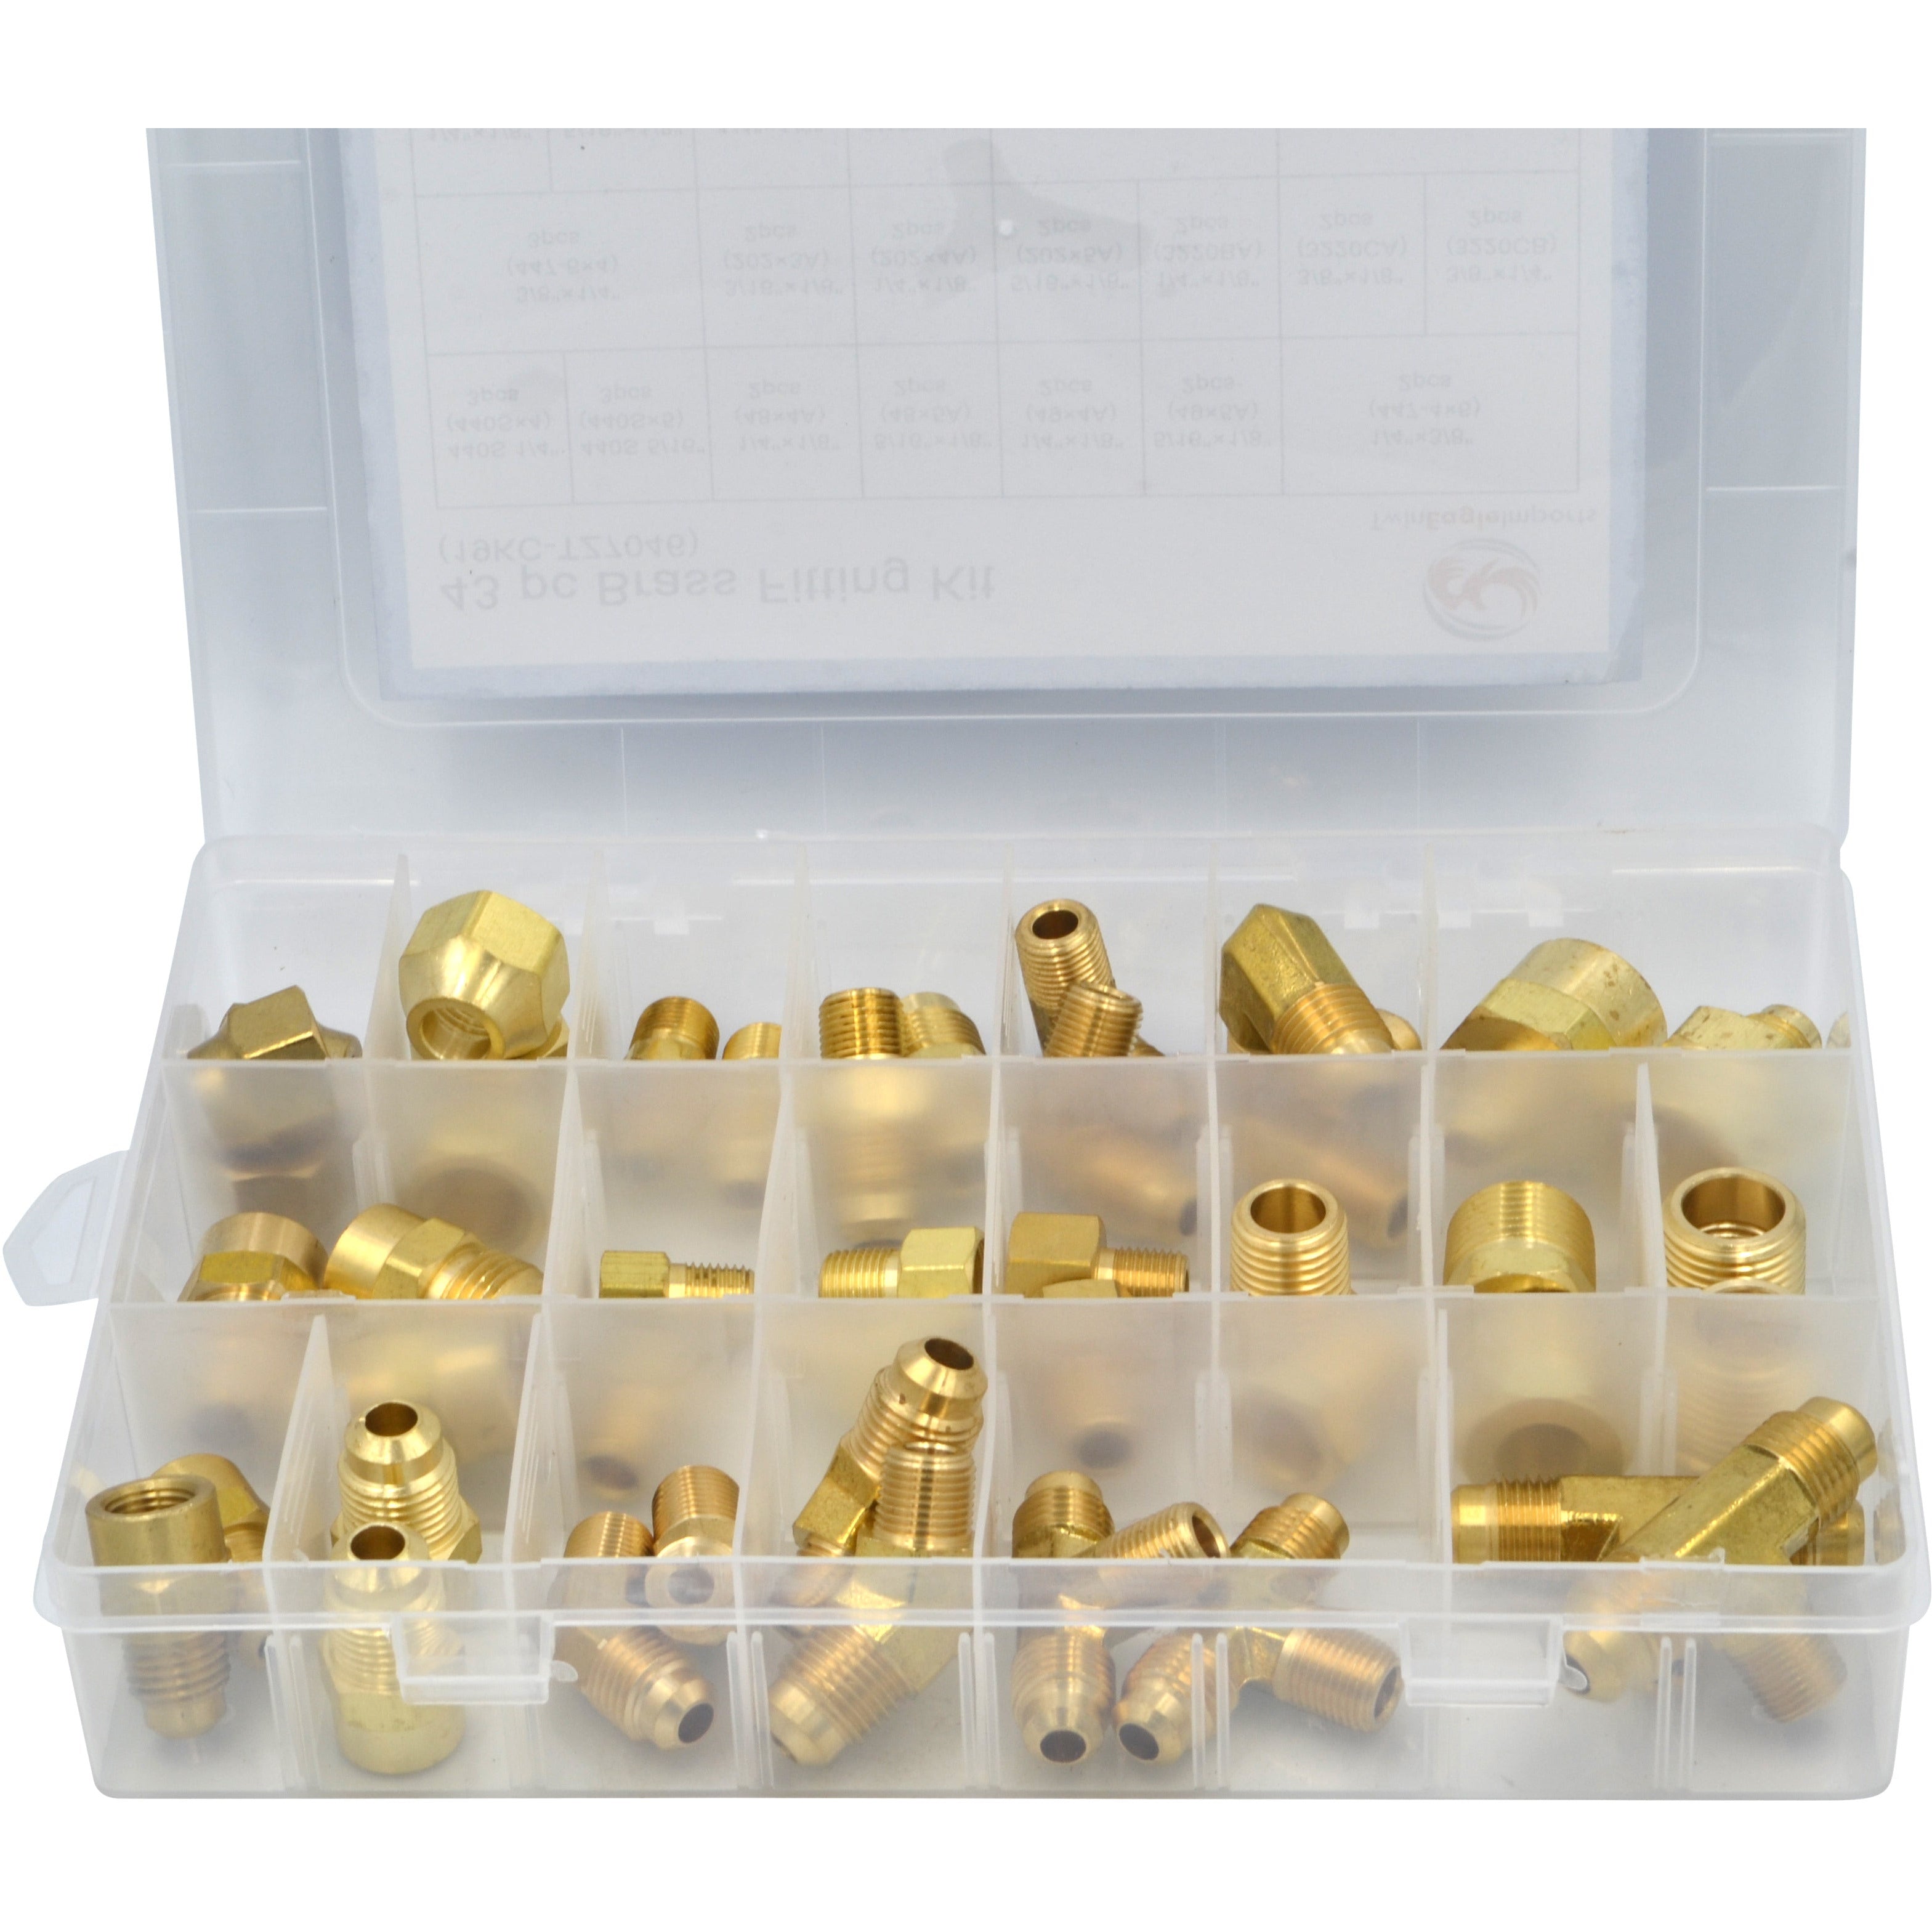 43 Pc Brass fitiings adaptors assortment grab kit, SAE NPT reducers and T pieces